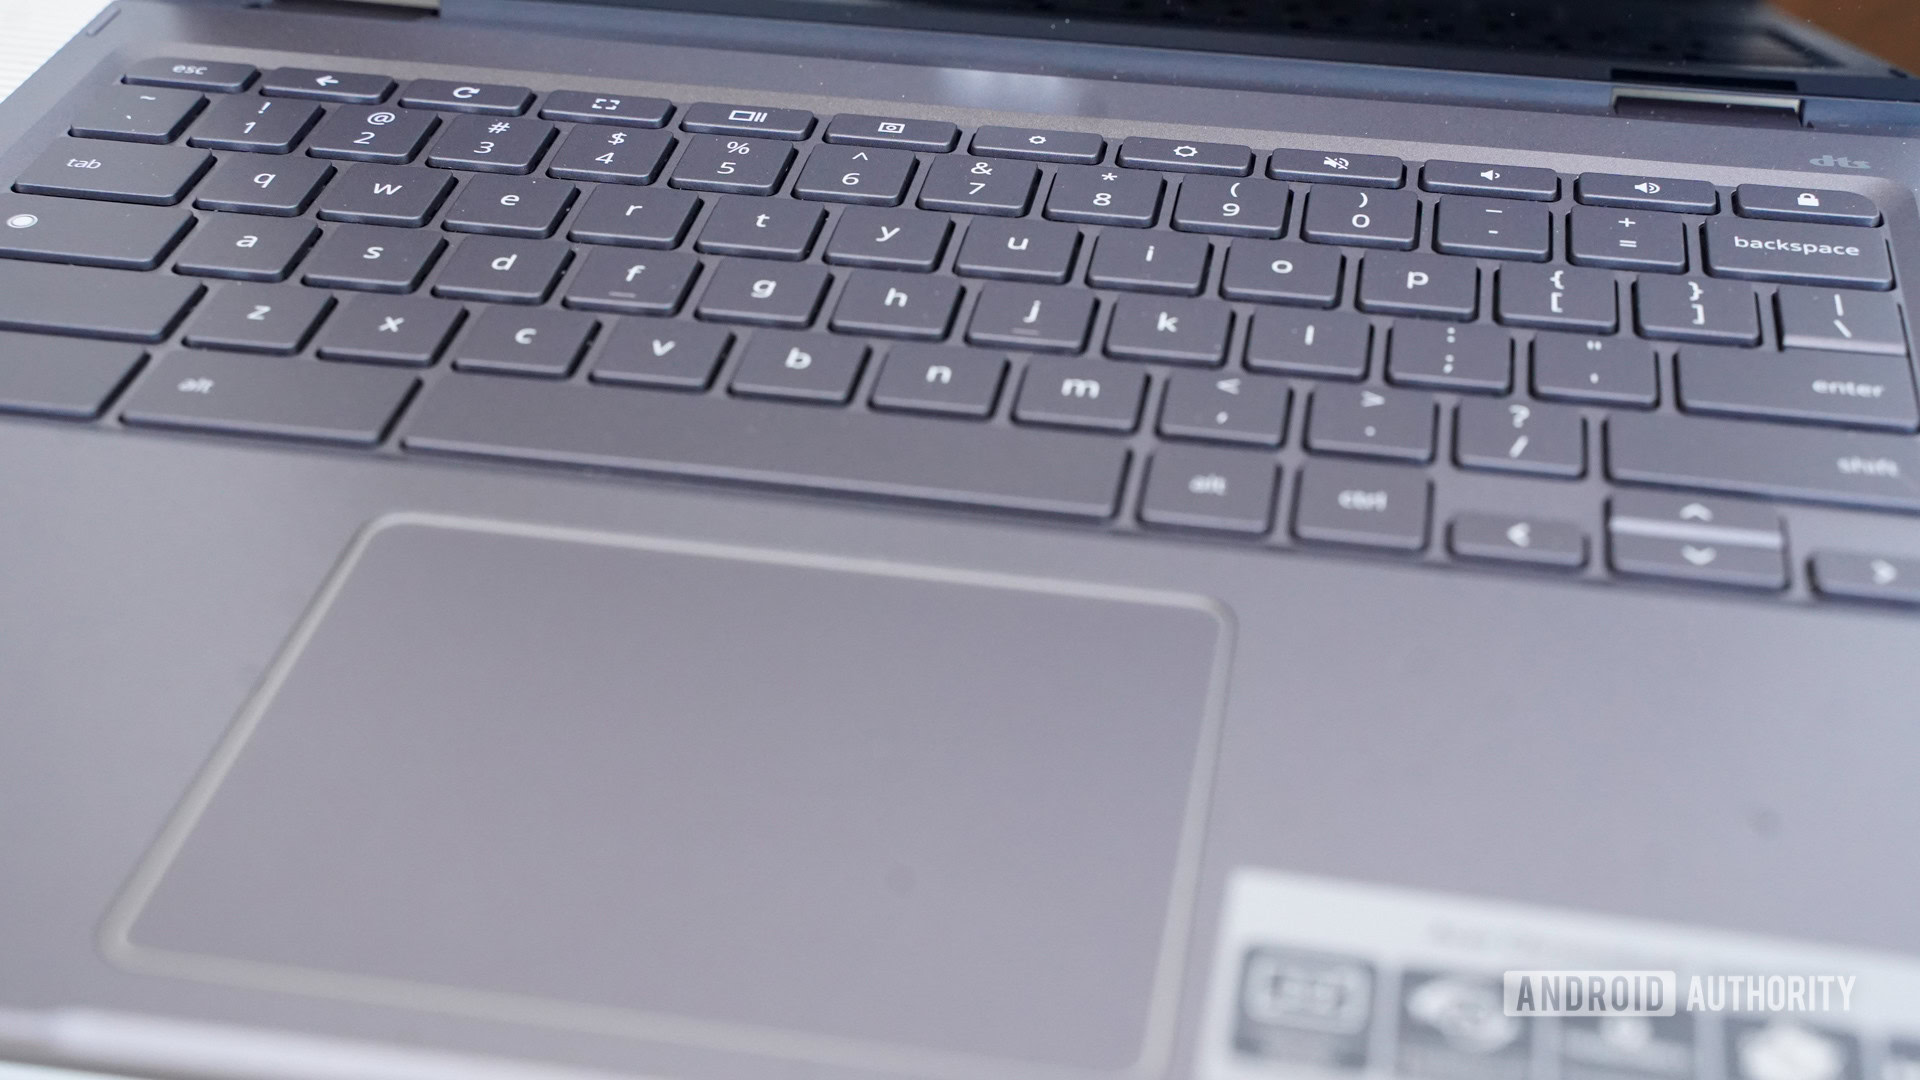 The Acer Chromebook Spin 713 keyboard and trackpad.